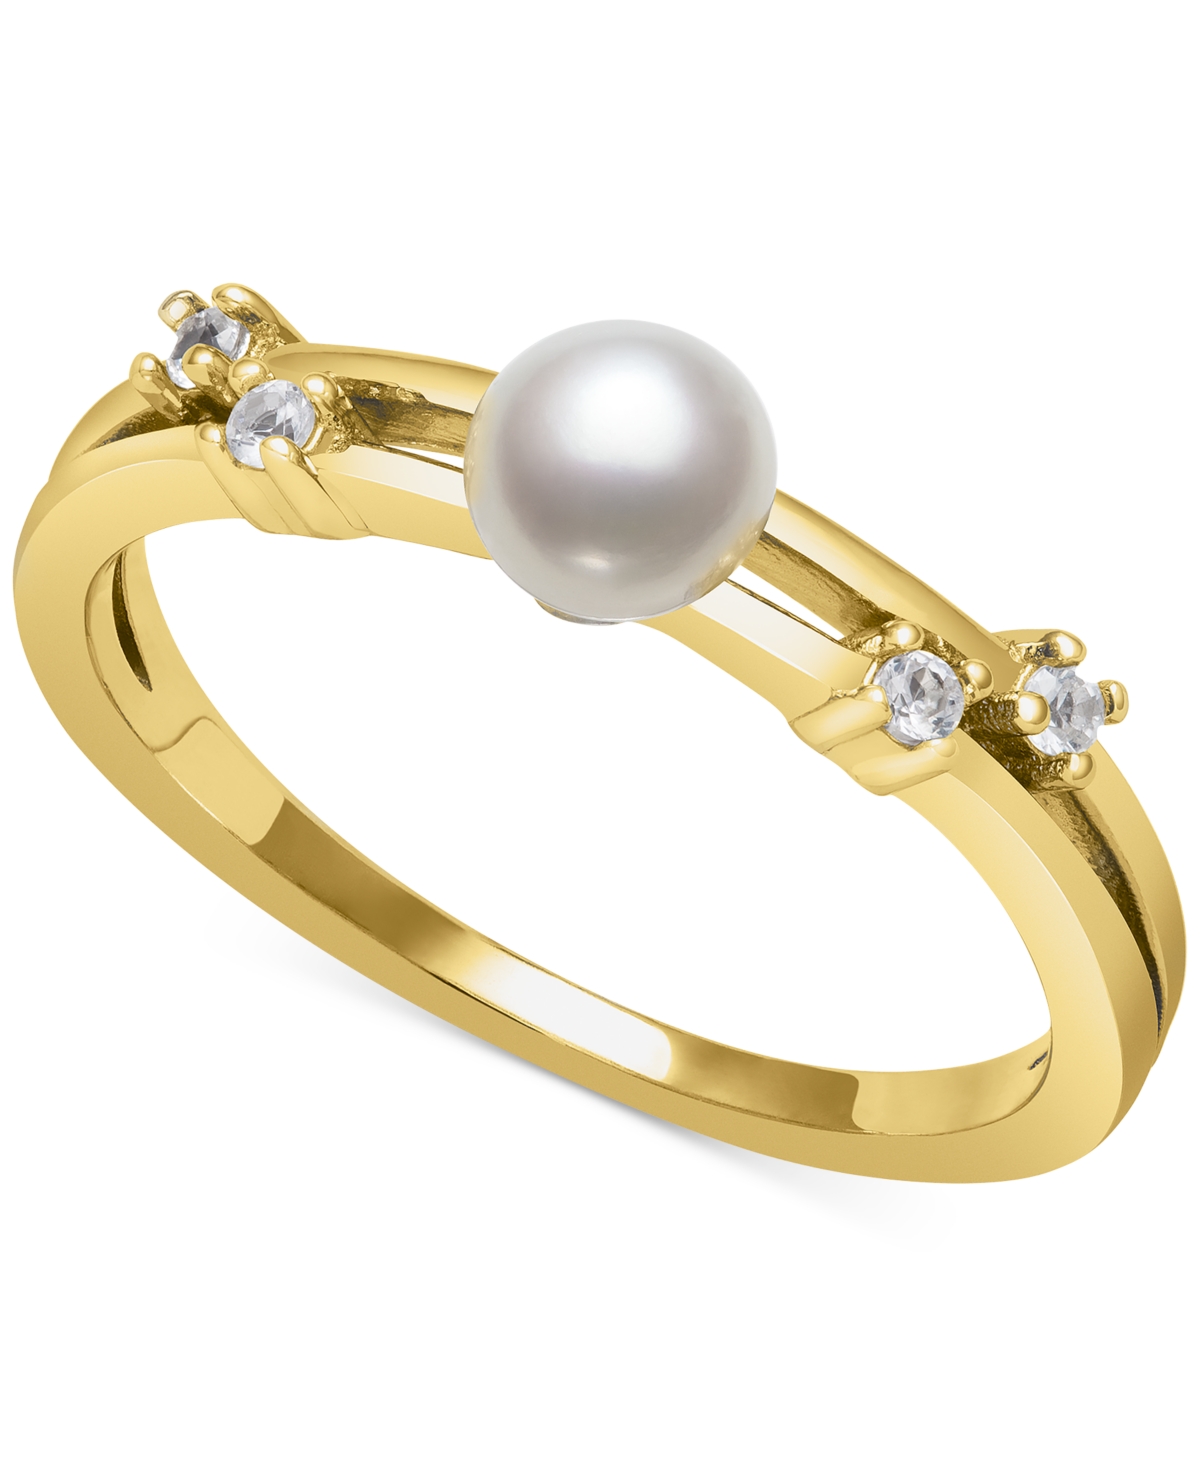 Belle de Mer Cultured Freshwater Button Pearl (5mm) & Lab-Created White Sapphire (1/10 ct. t.w.) Ring